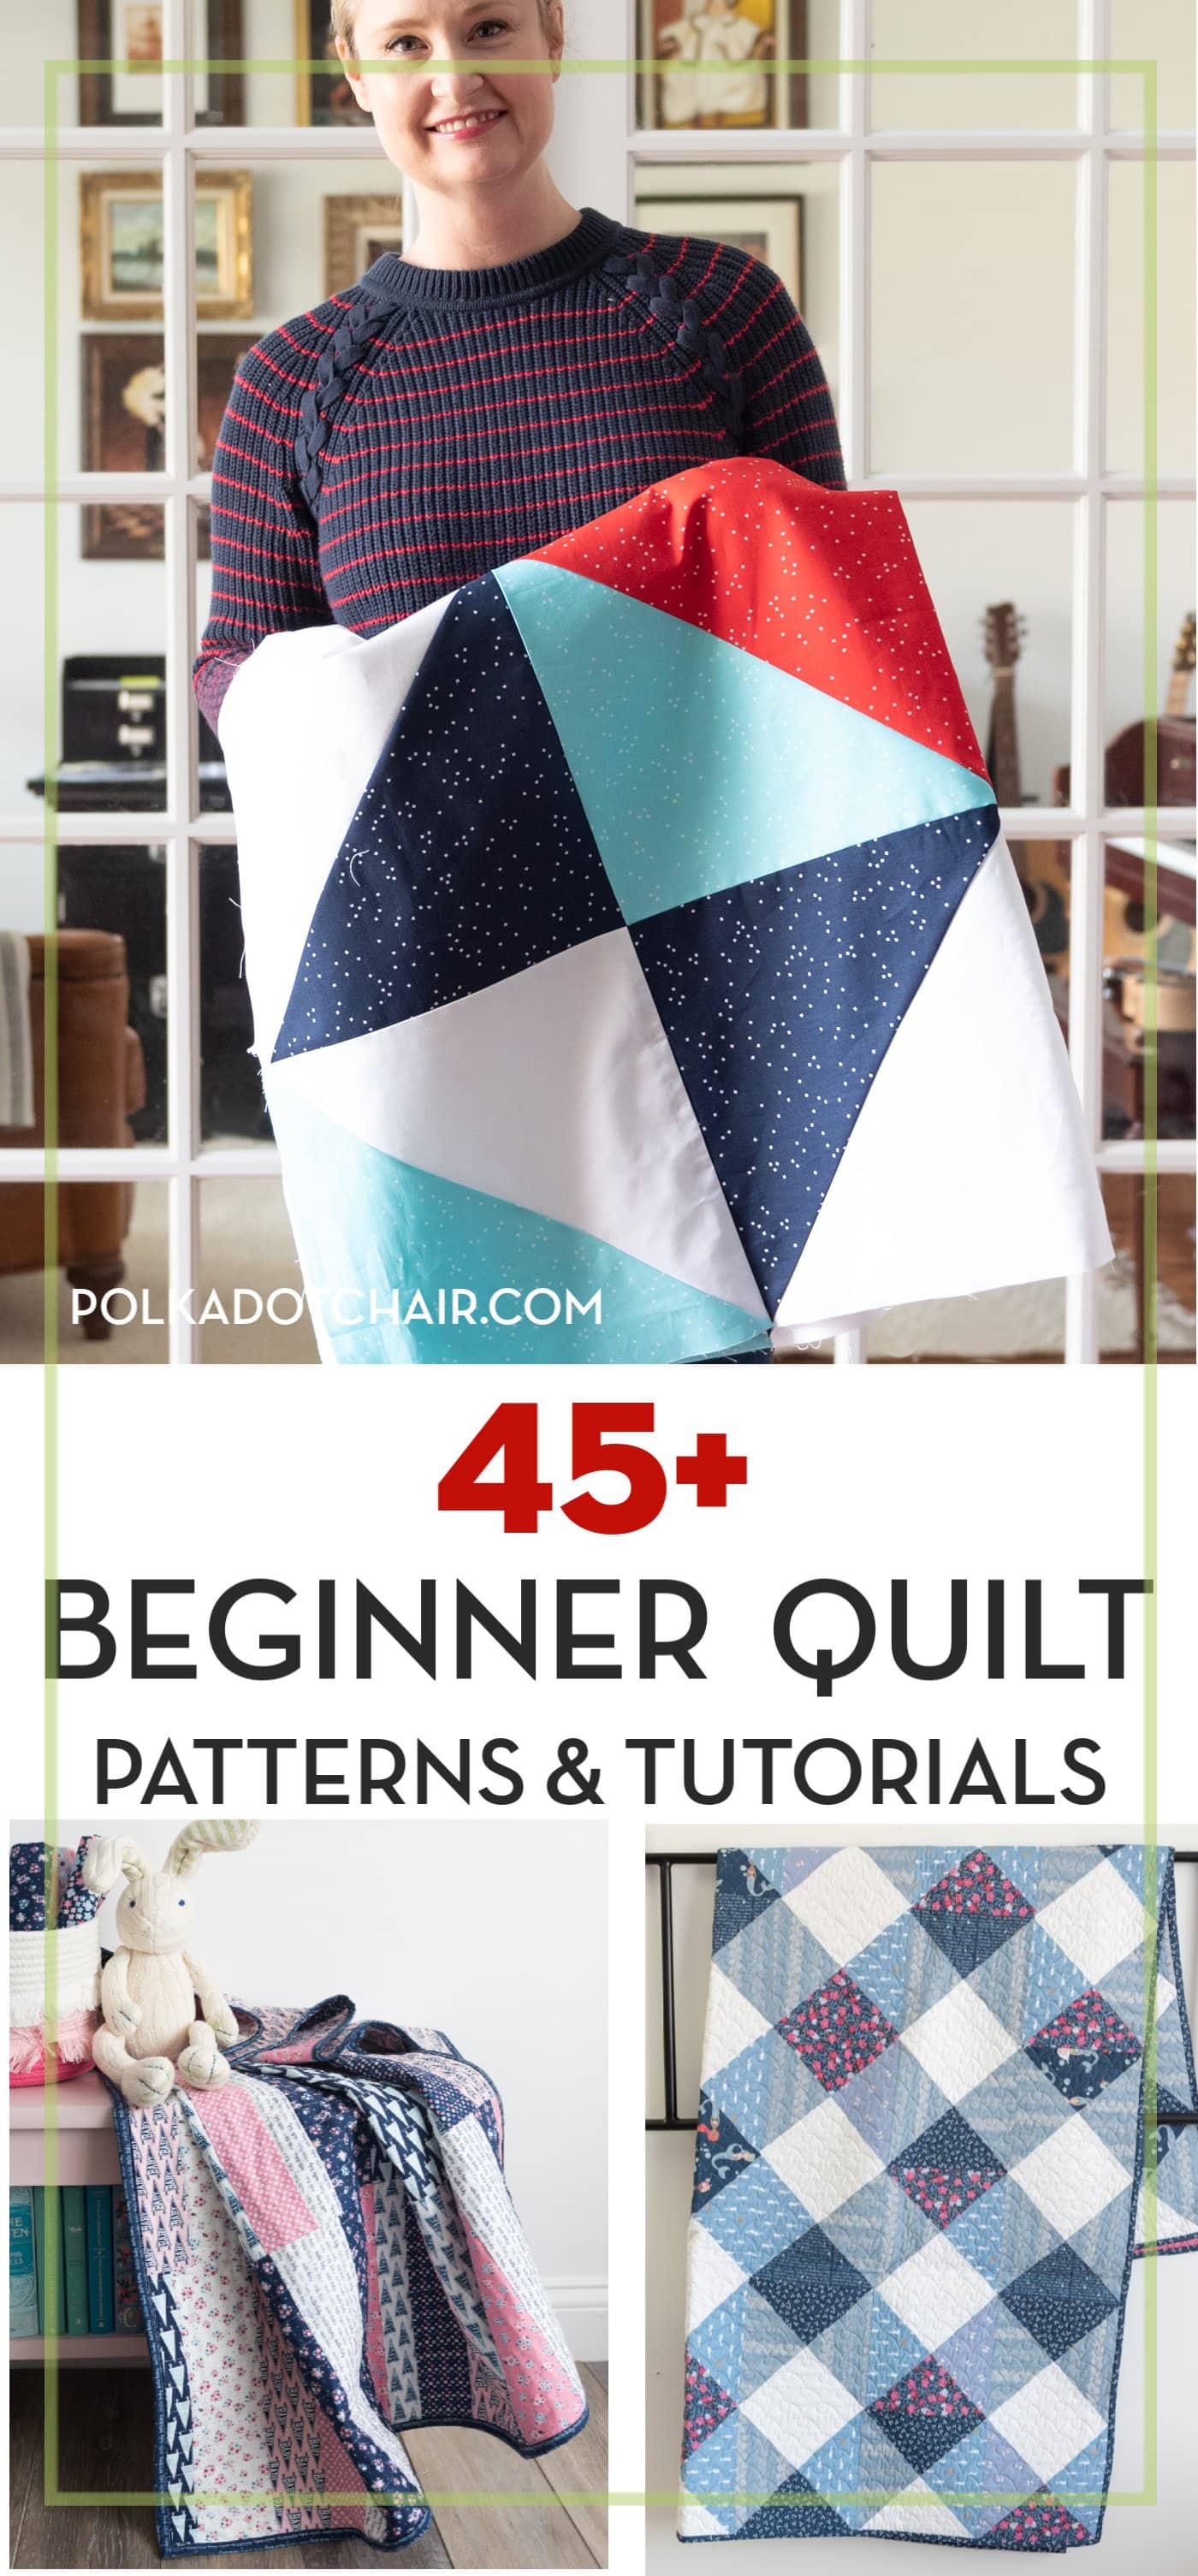 45+ Easy Beginner Quilt Patterns and Free Tutorials Polka Dot Chair